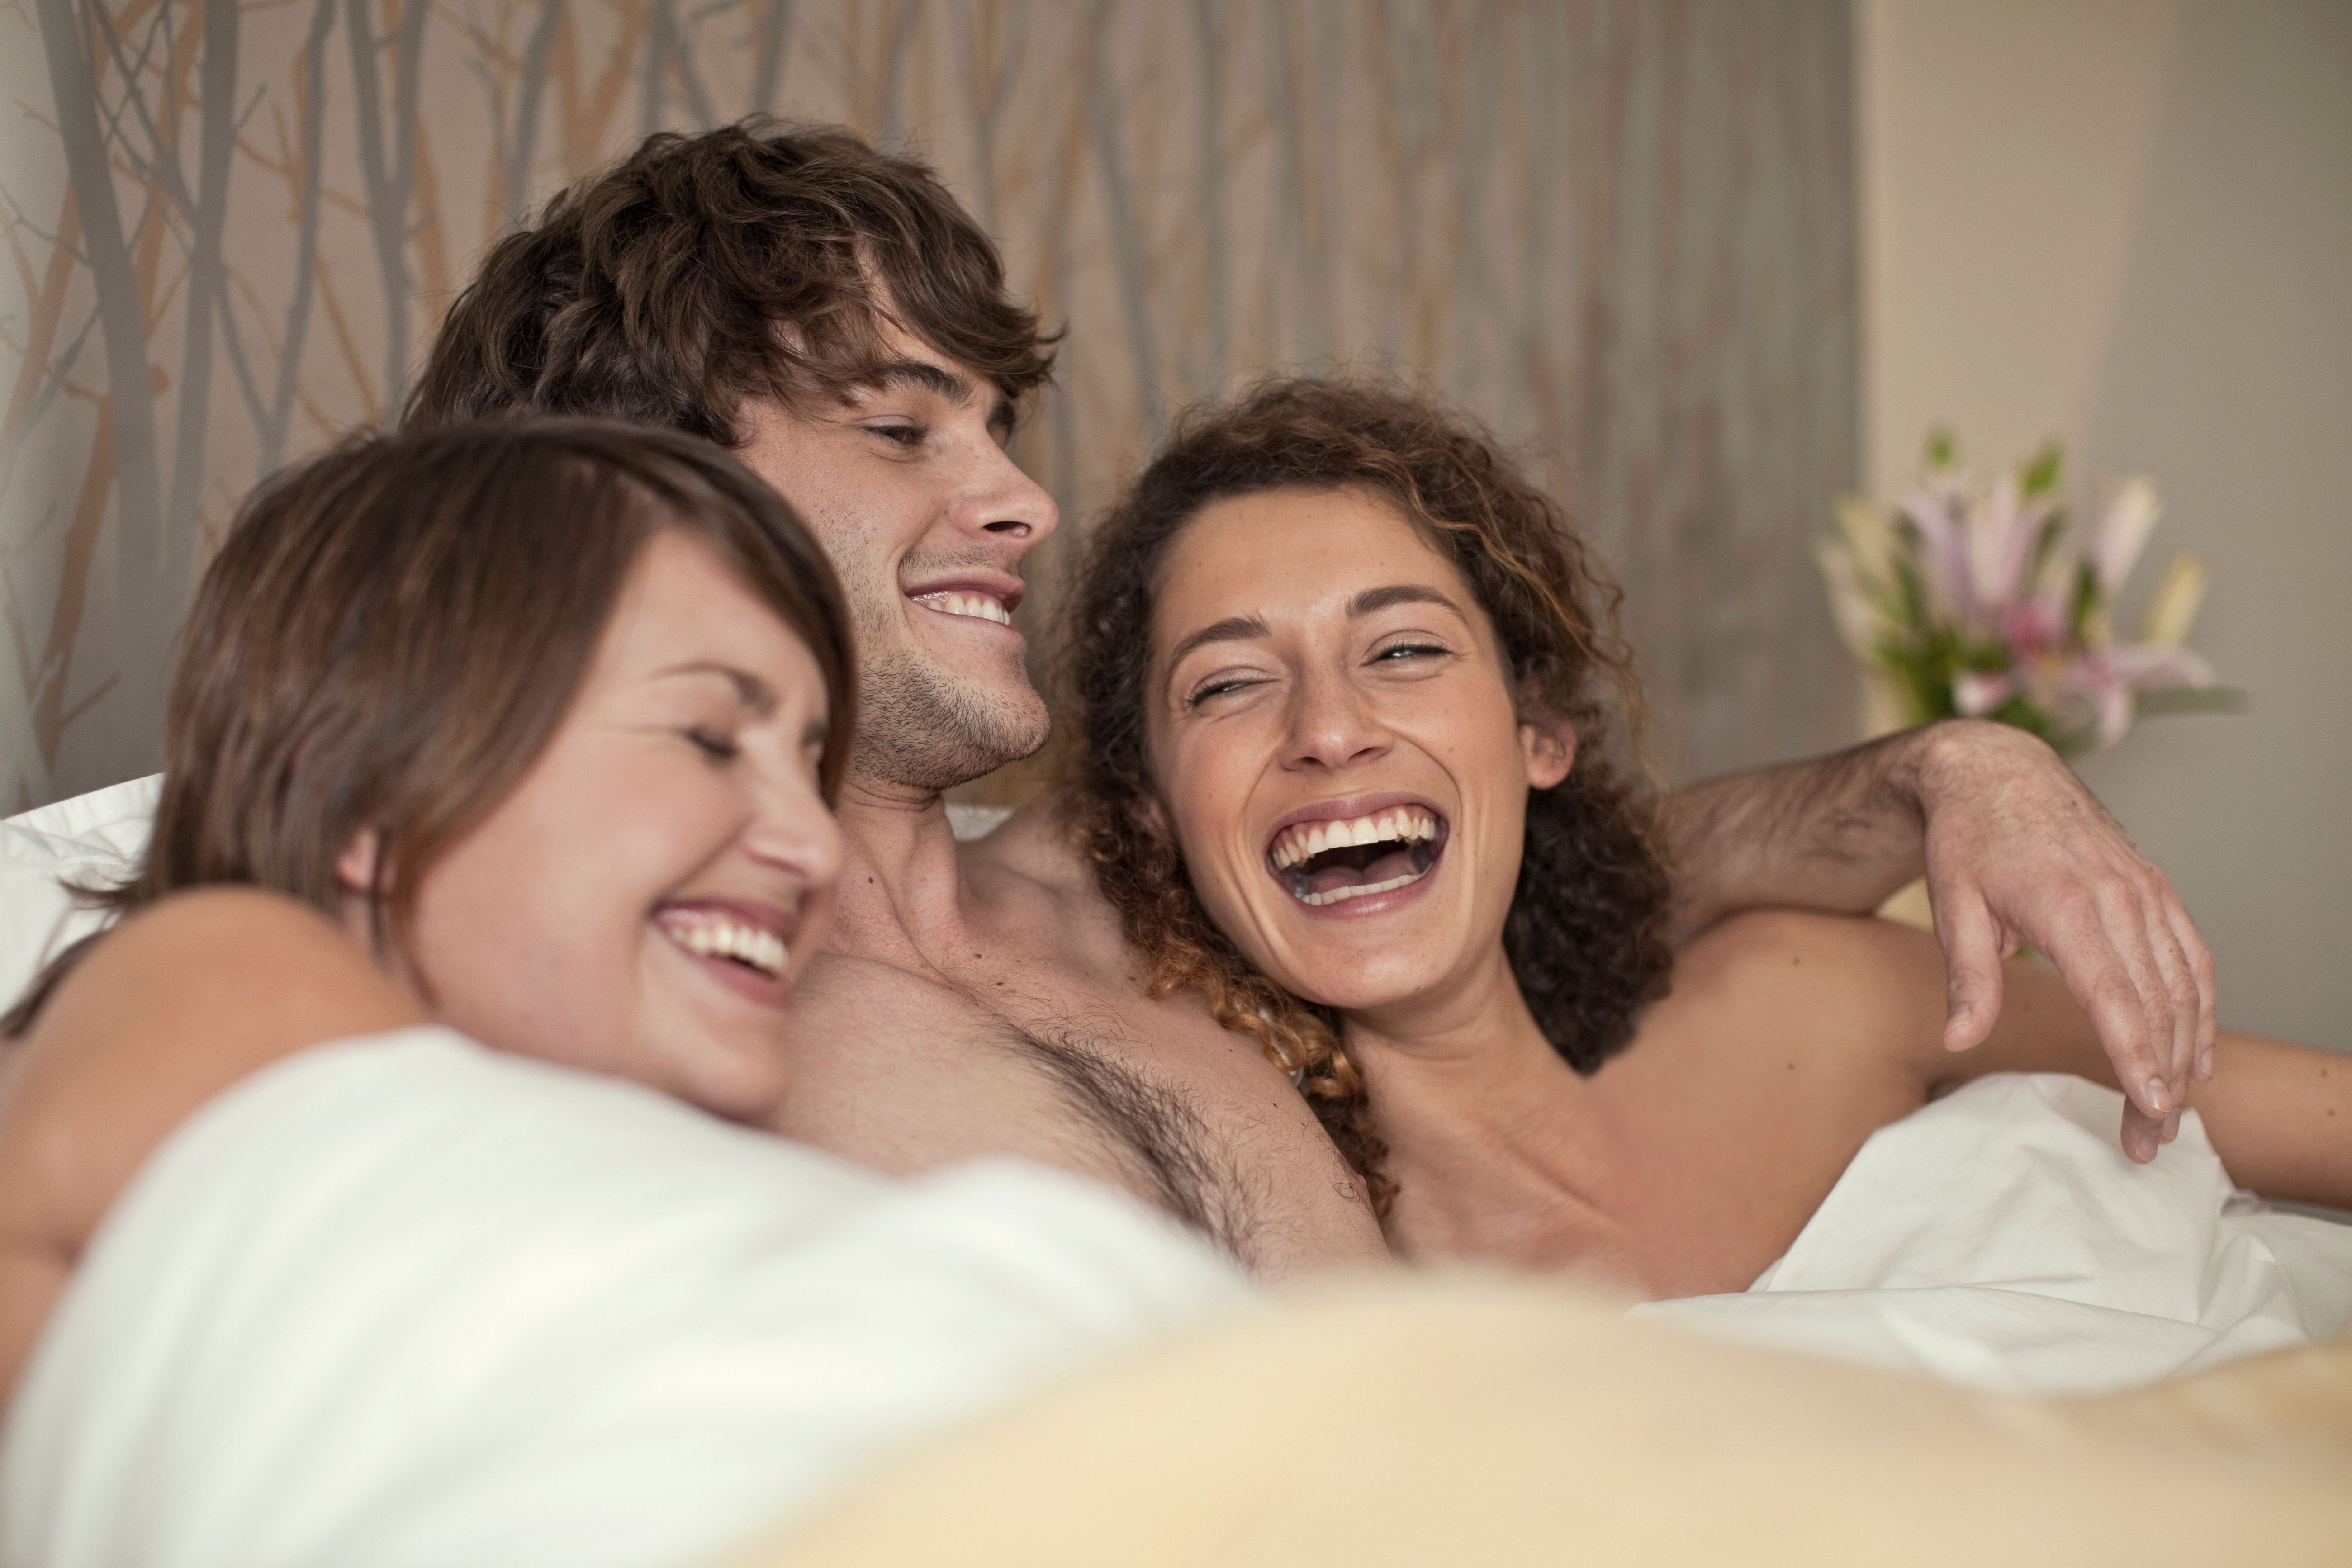 How to Have a Great Threesome, According to People Whove Done It pic